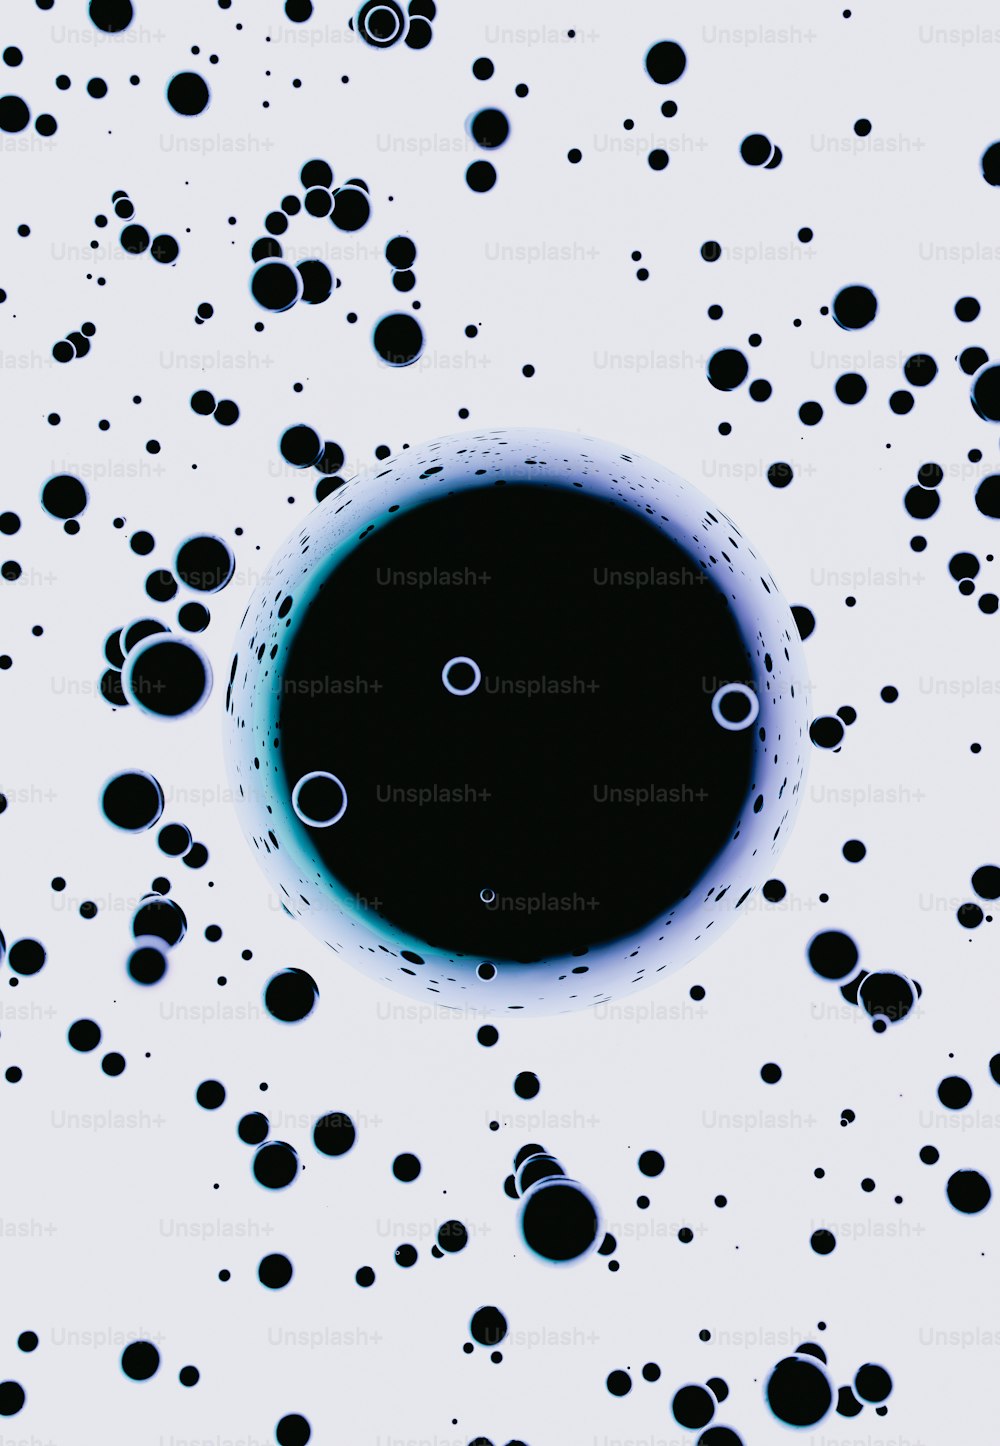 a black circle surrounded by black and white circles